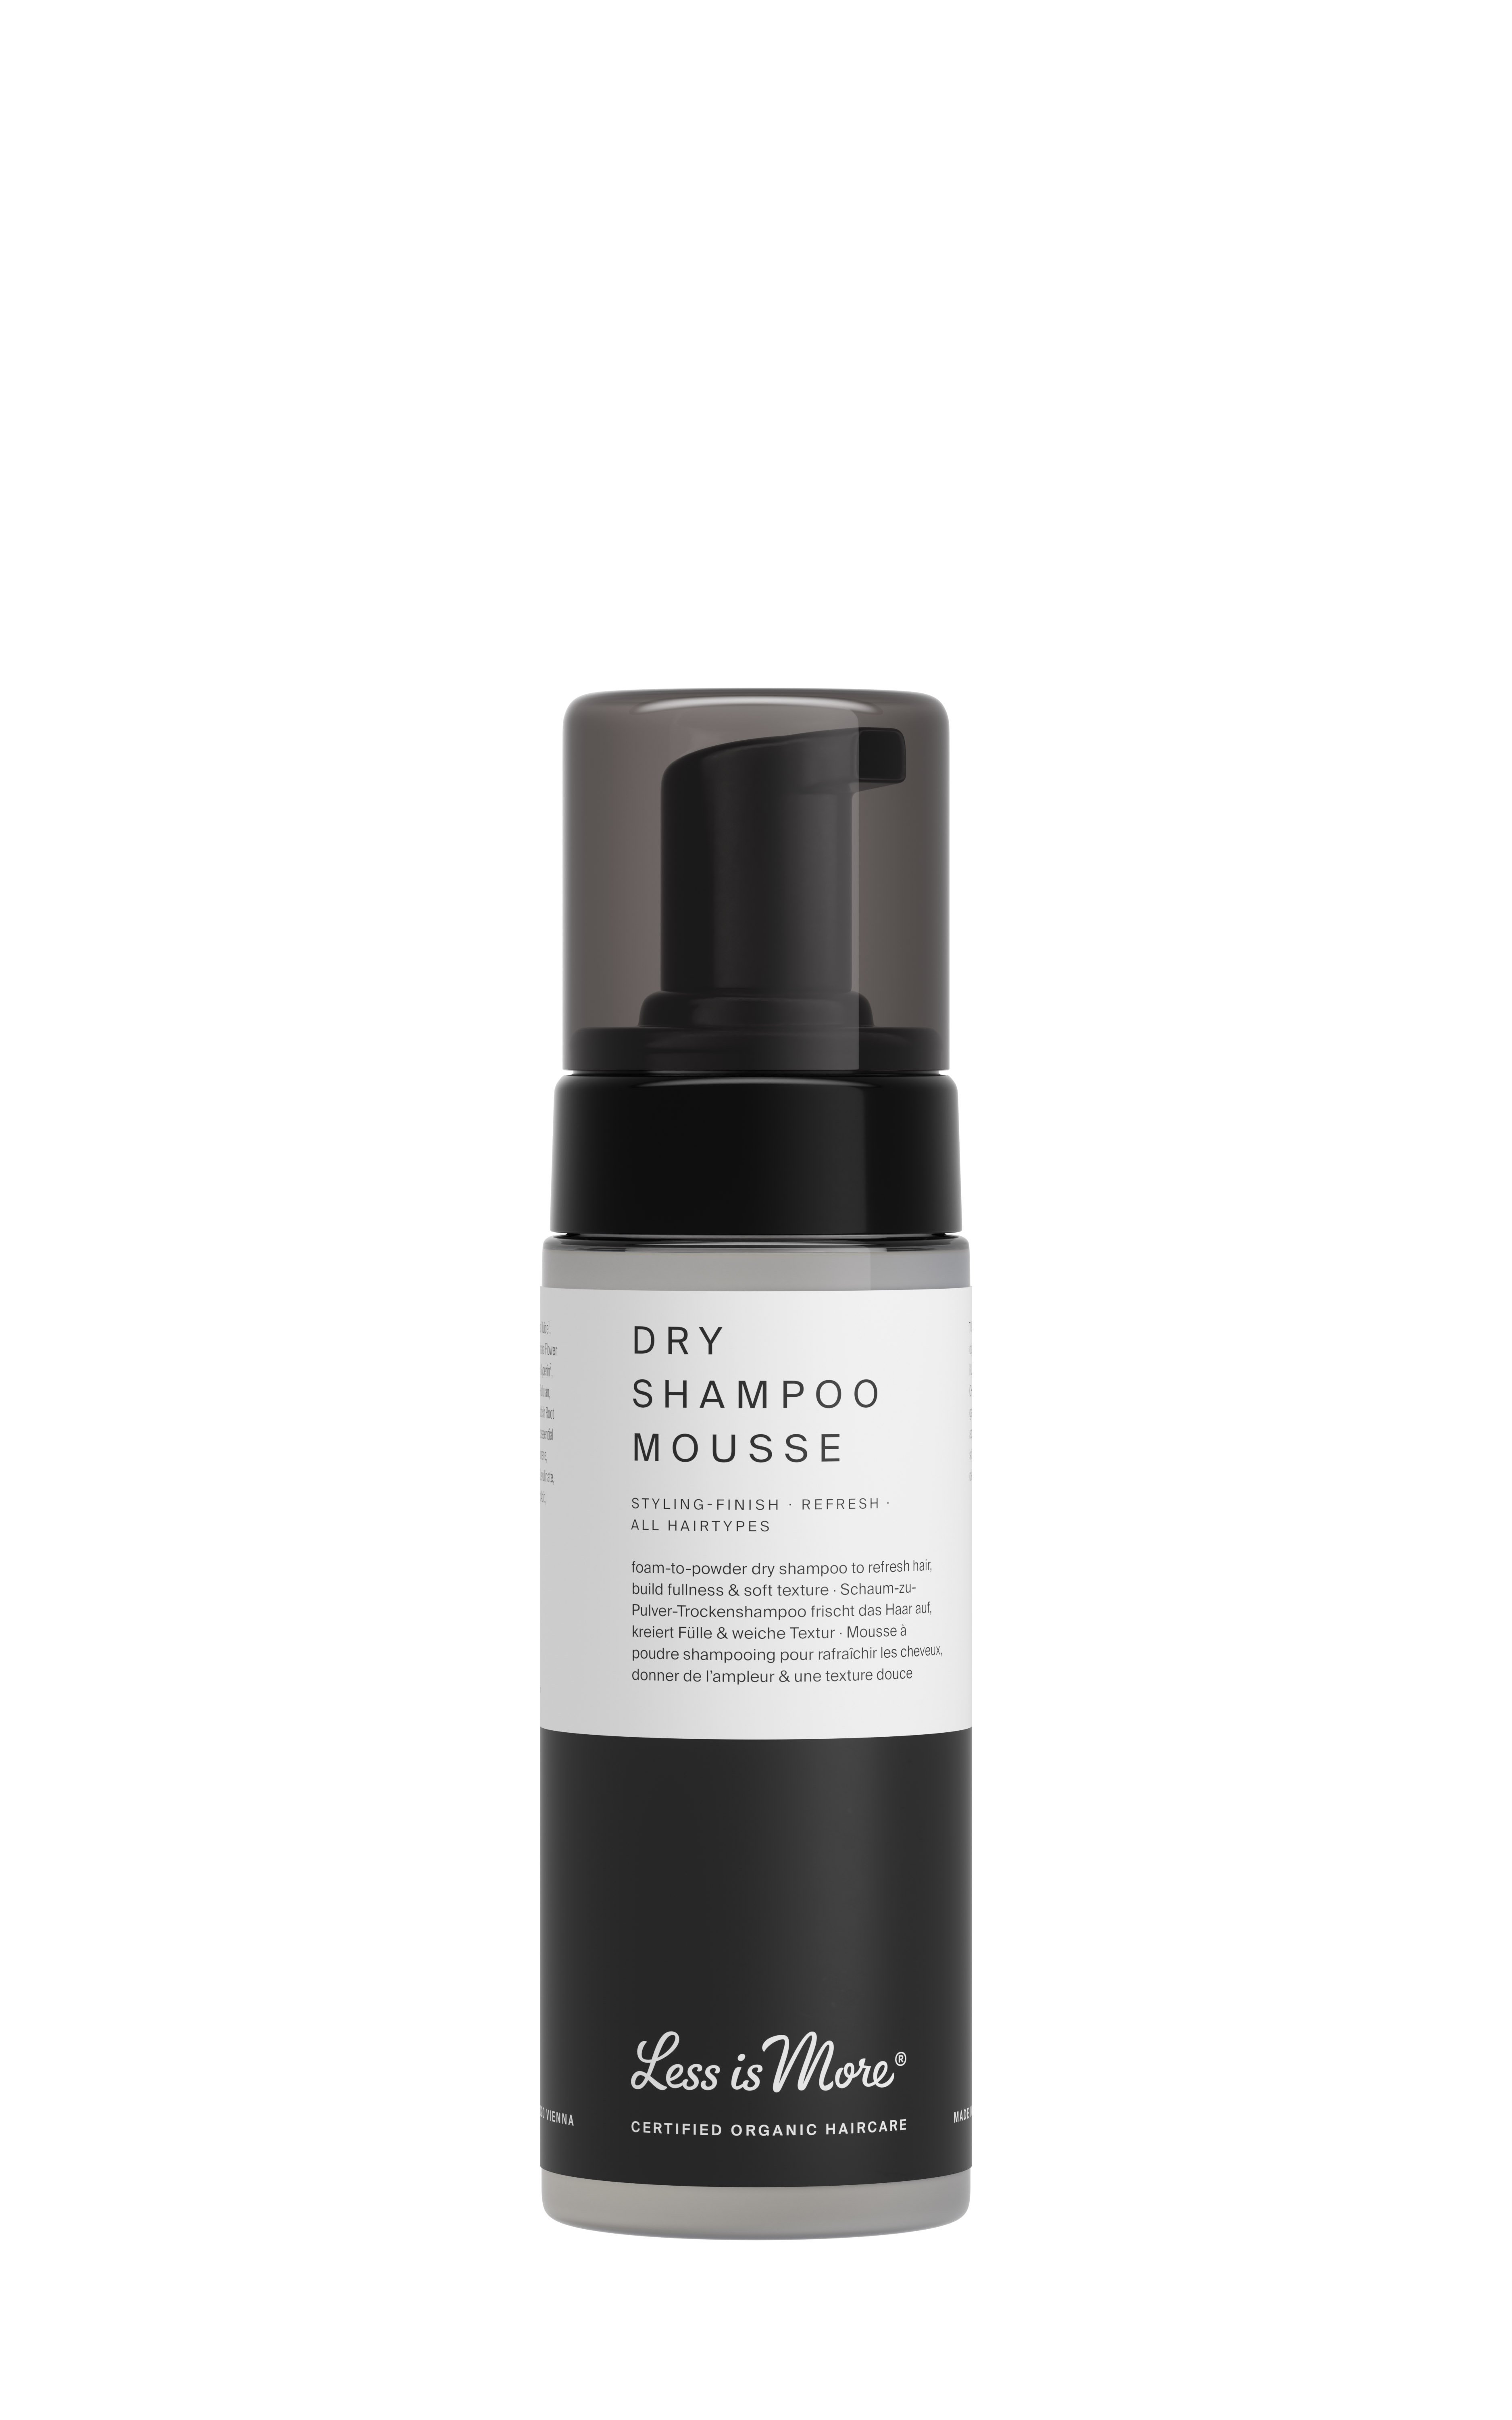 banan Kostbar liste Dry Shampoo Mousse 150 ml from Less is More - LESS IS MORE - Barnholdts at  Studio Cim Mahony